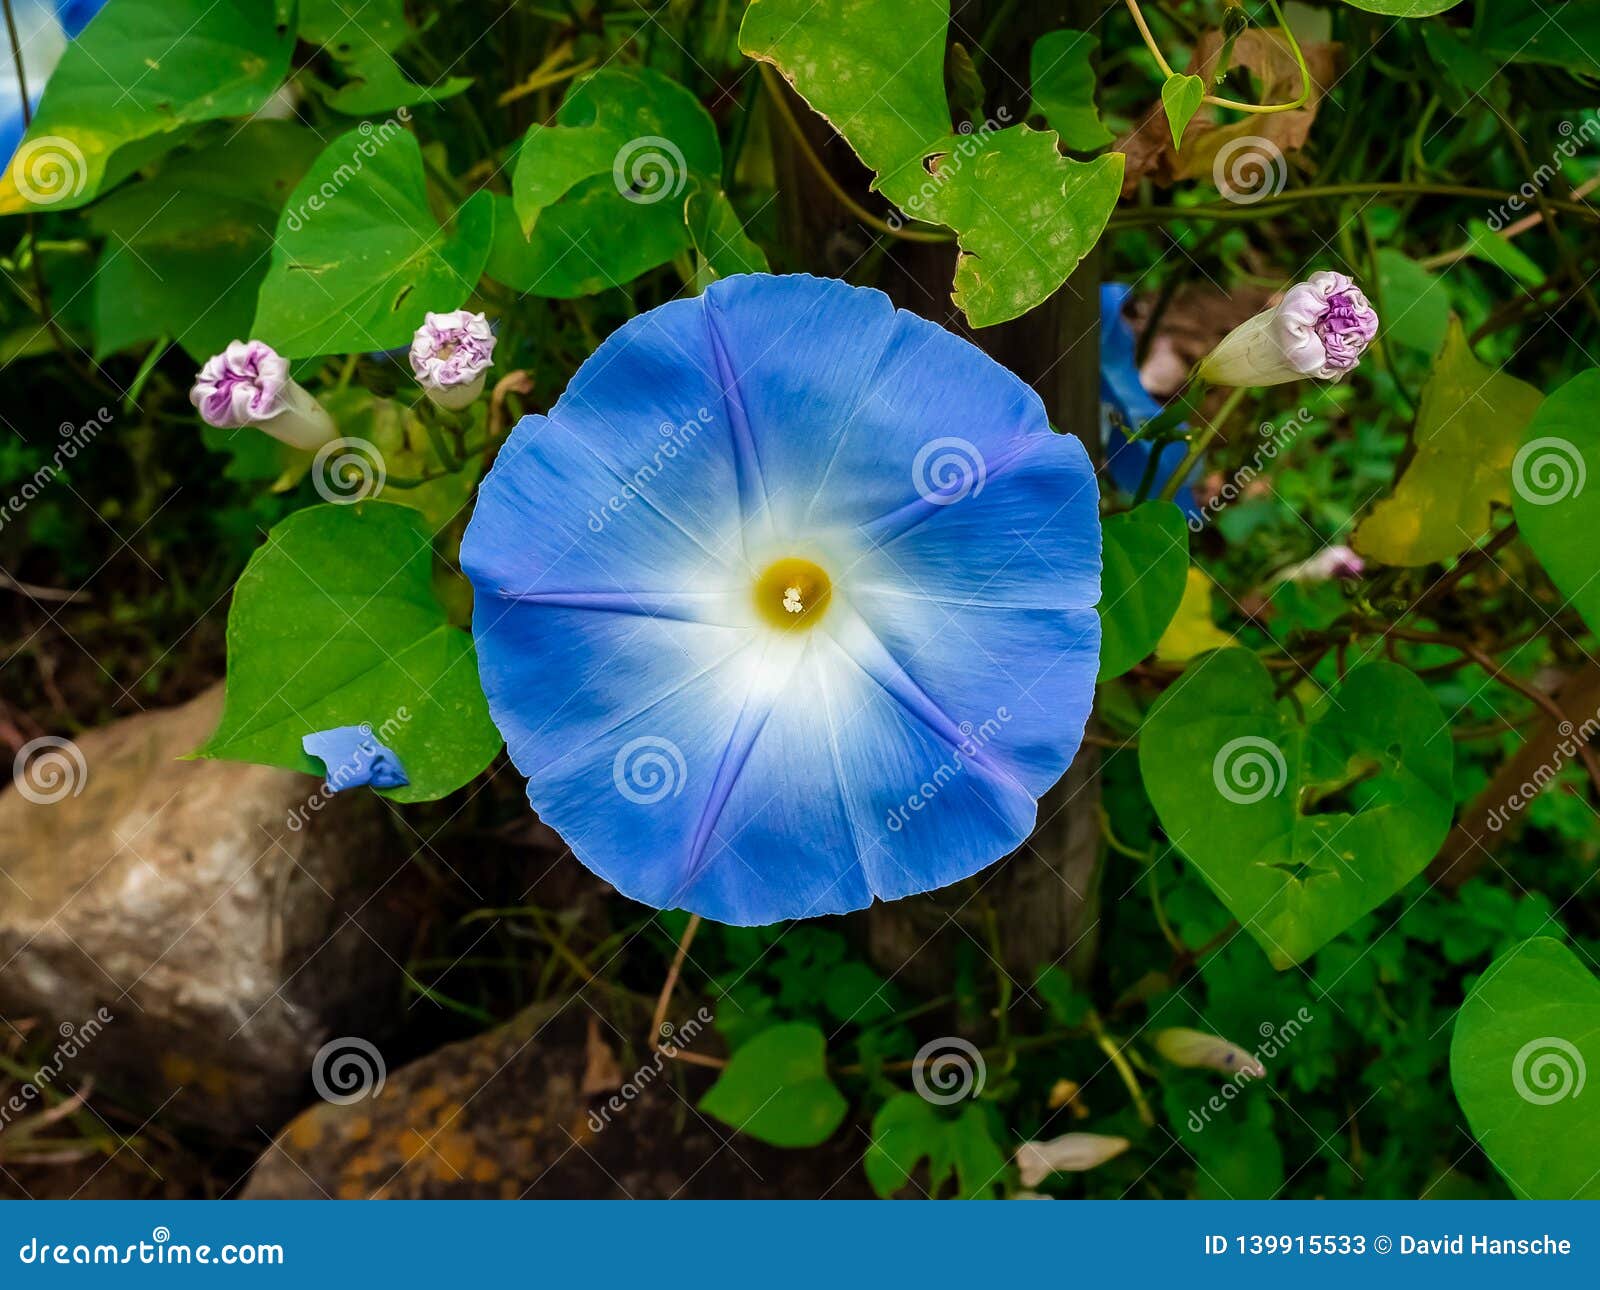 blue morning glory flower in a park